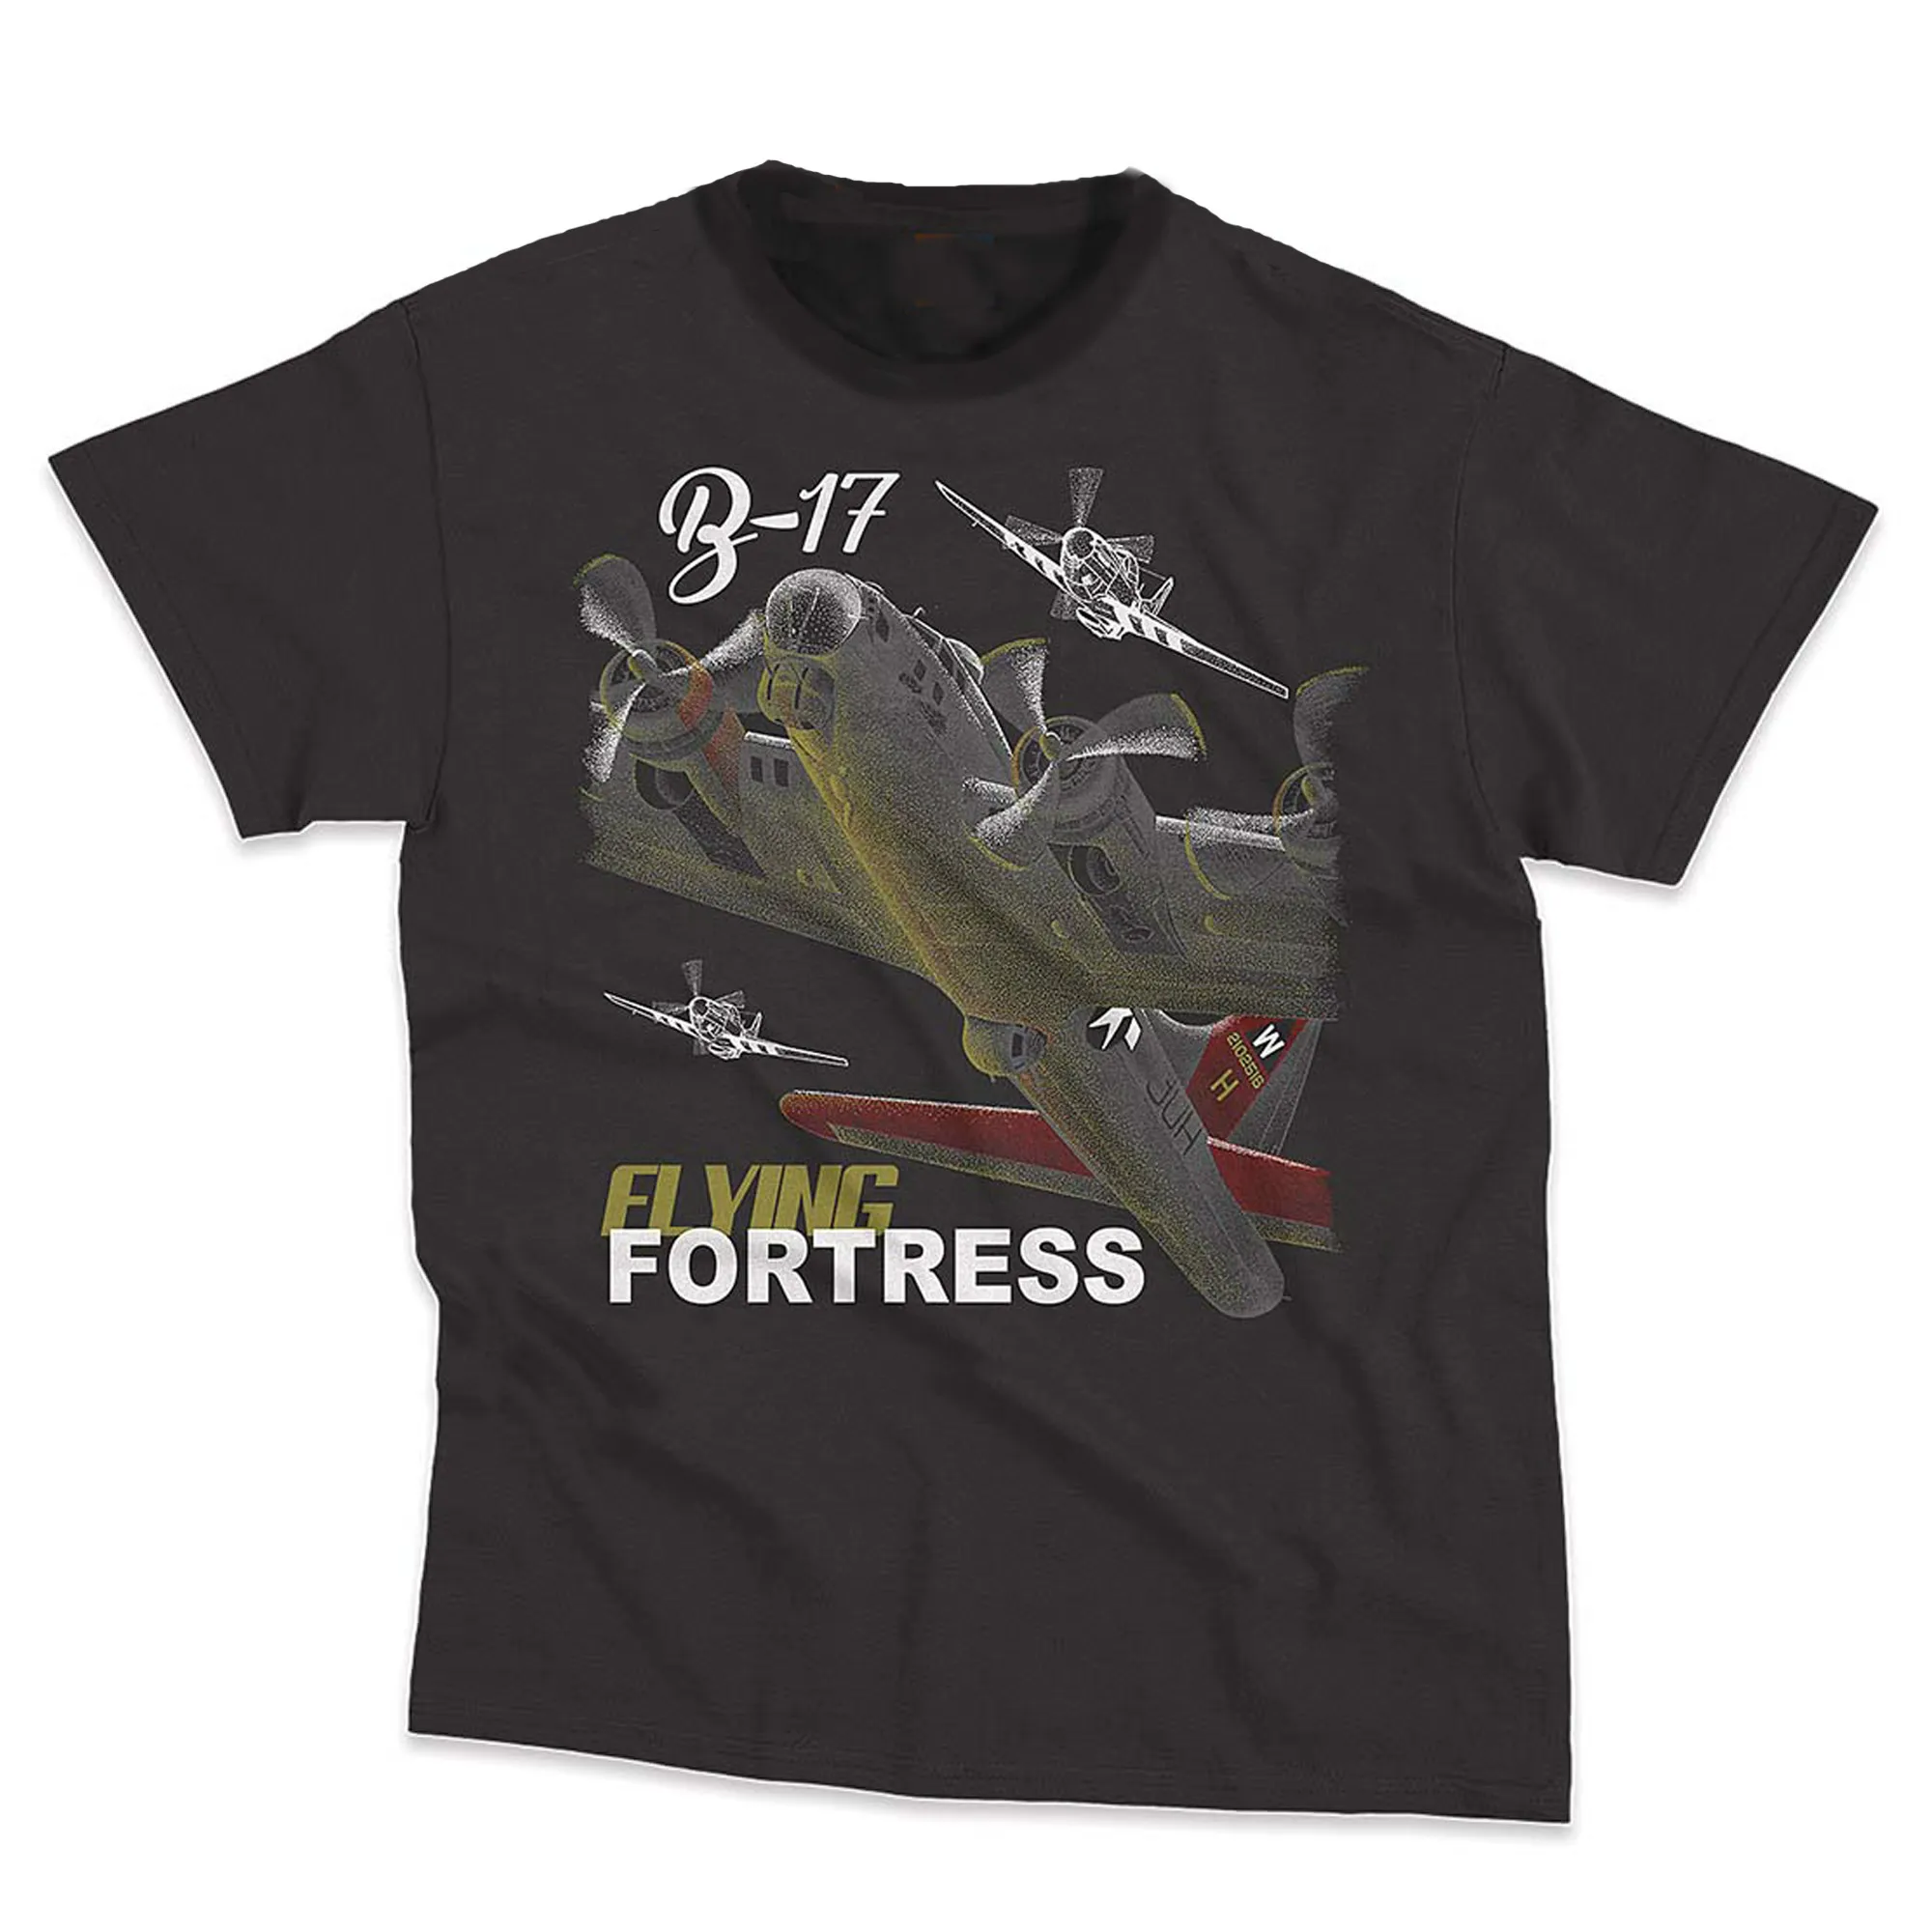 

B-17 Flying Fortress Bomber Striking Image Printed T Shirt. Short Sleeve 100% Cotton Casual T-shirts Loose Top new Size S-3XL